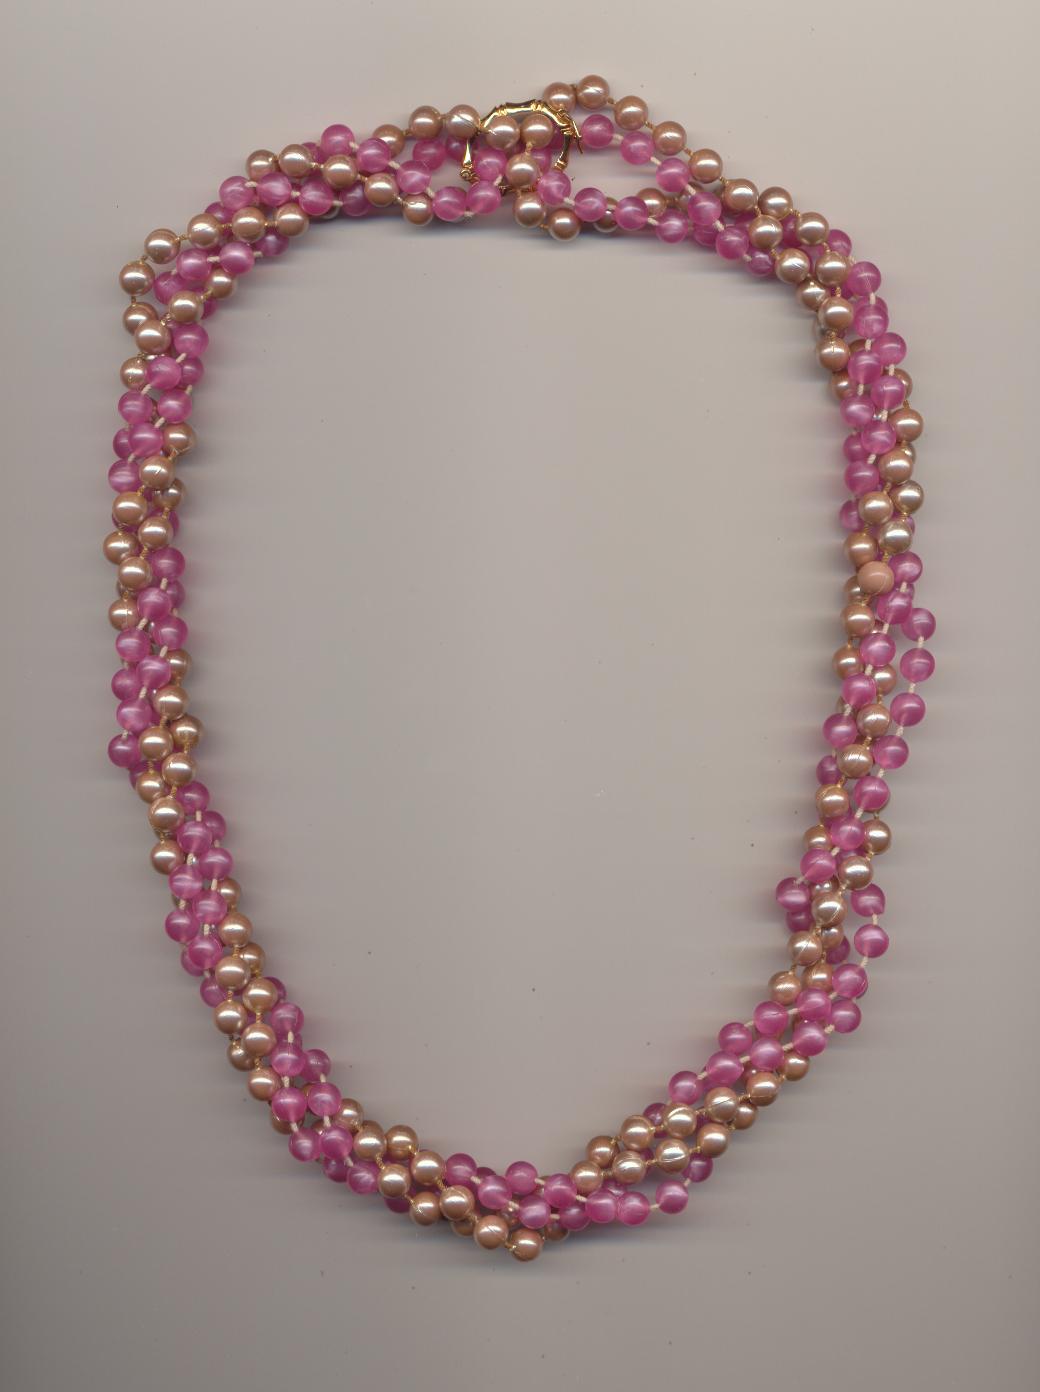 A Twisted Four Strand Bead Necklace Made Of Two Necklaces And A Pearl Shortener